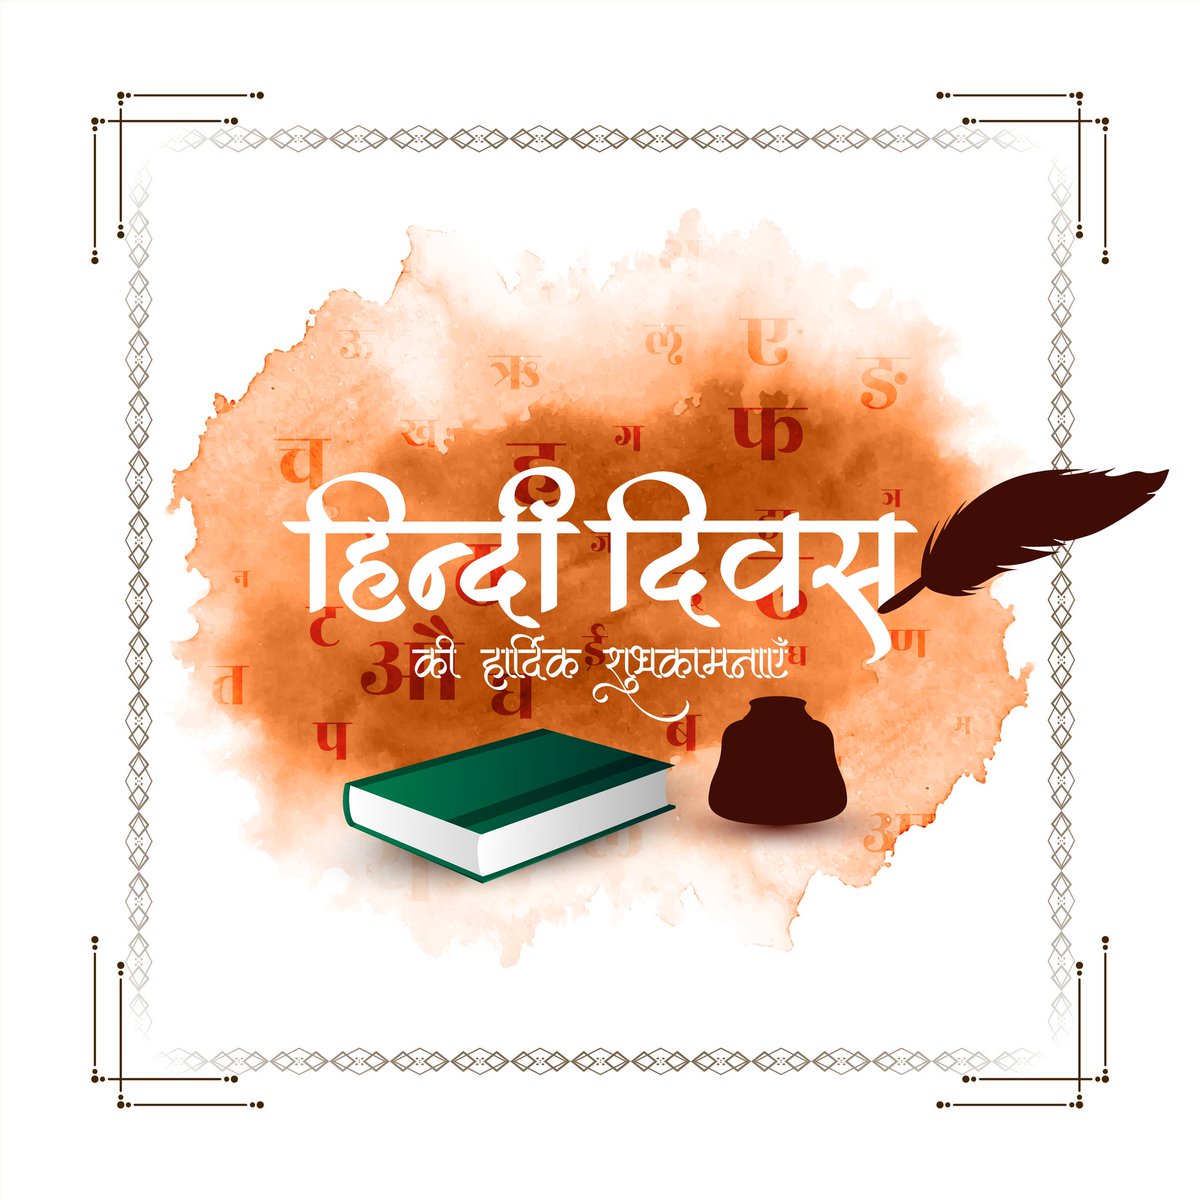 It's #HindiDivas today! I've been looking for writers who write #science and science #fiction stories in Hindi. Do we have recommendations?
Please spread the word ✨